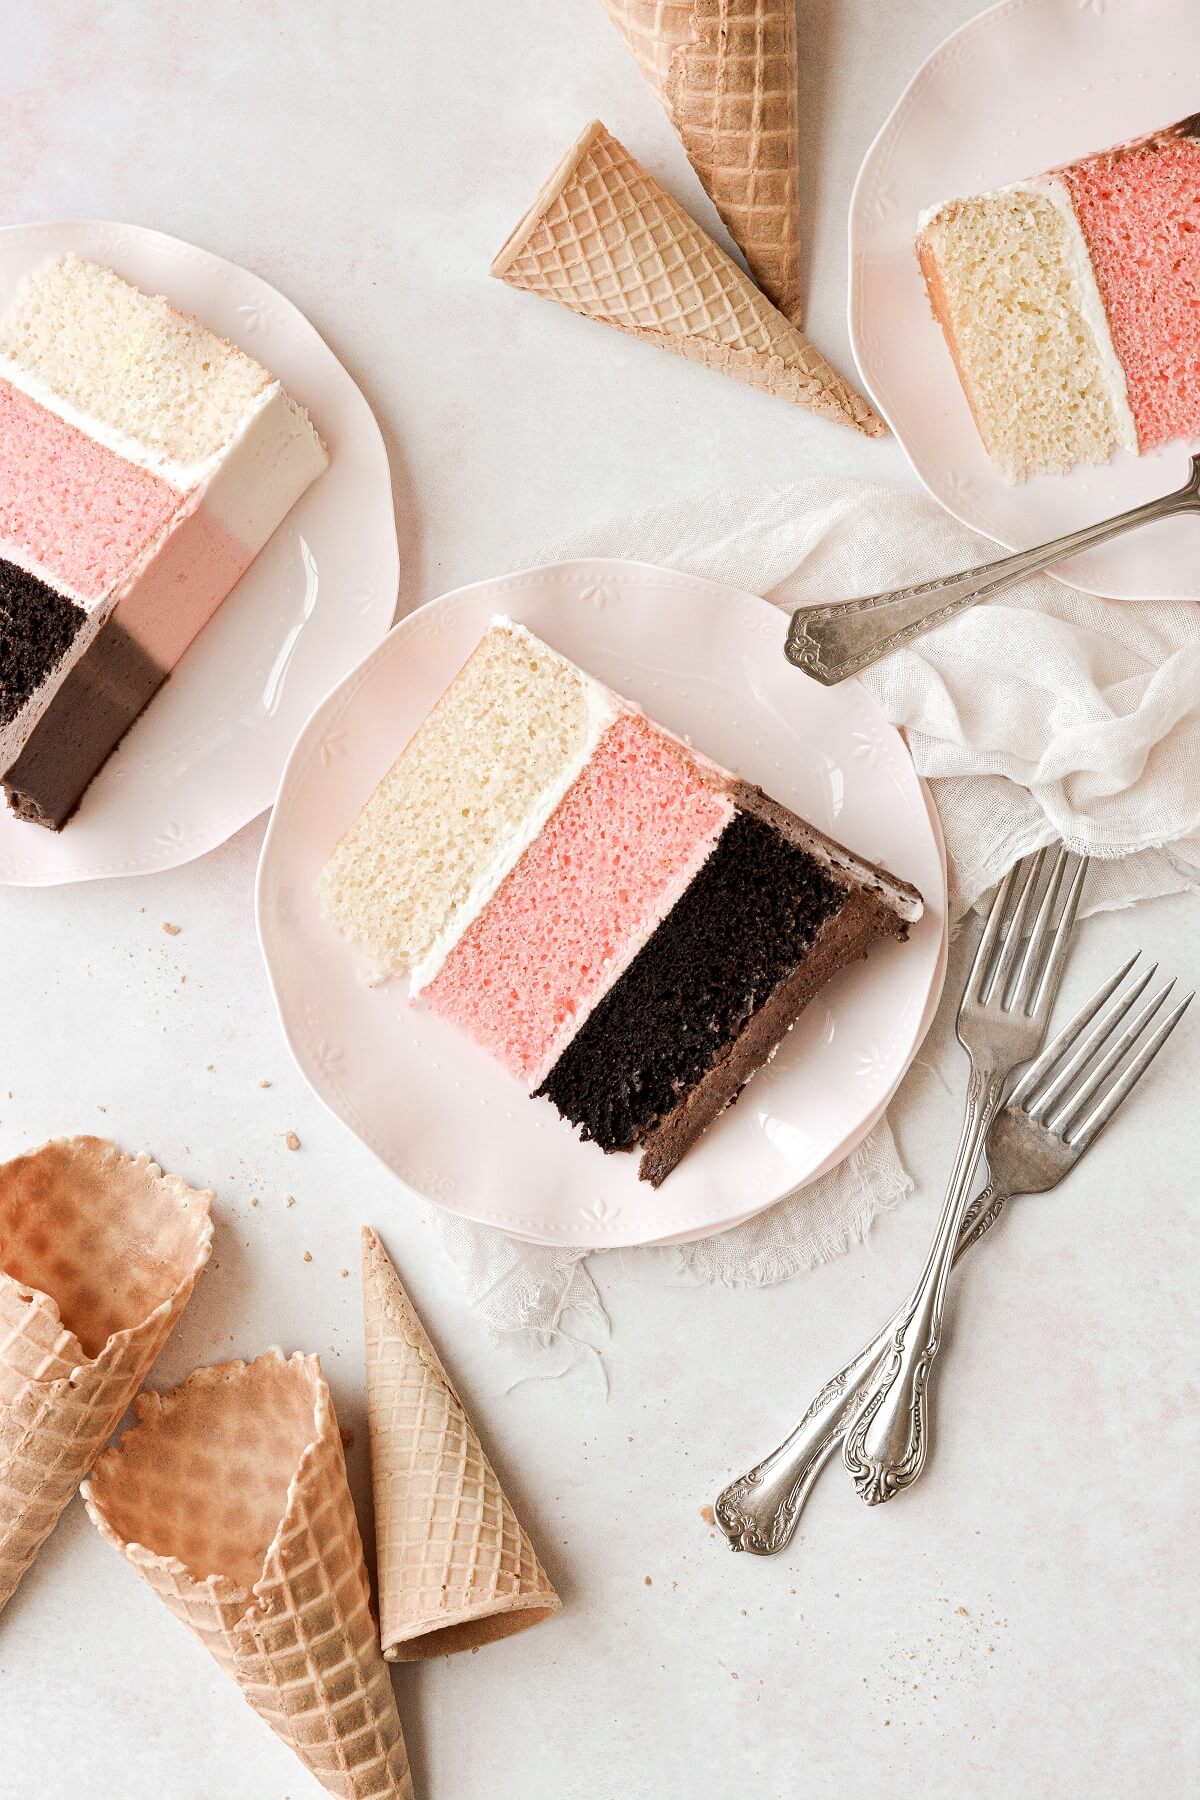 Slices of neapolitan cake, surrounded by ice cream cones.